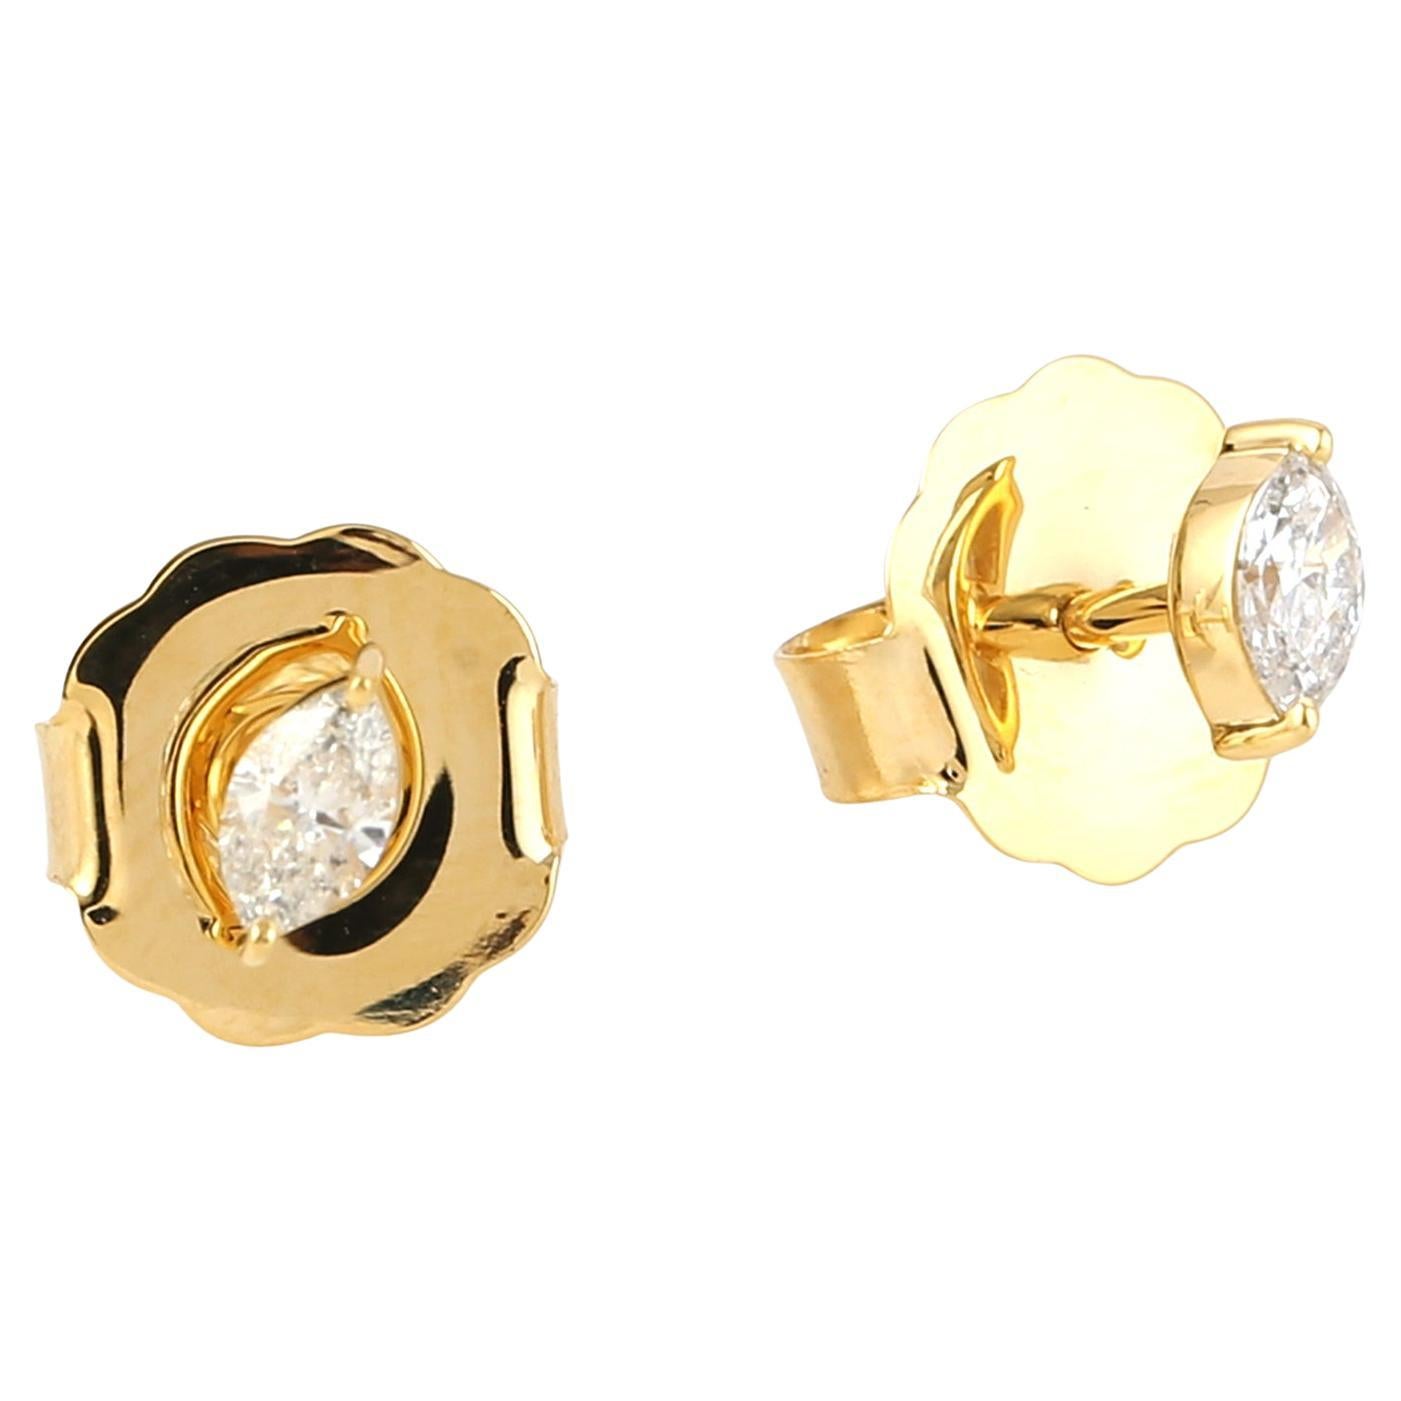 Marquise Shape Diamond Studs Made In 14K Yellow Gold